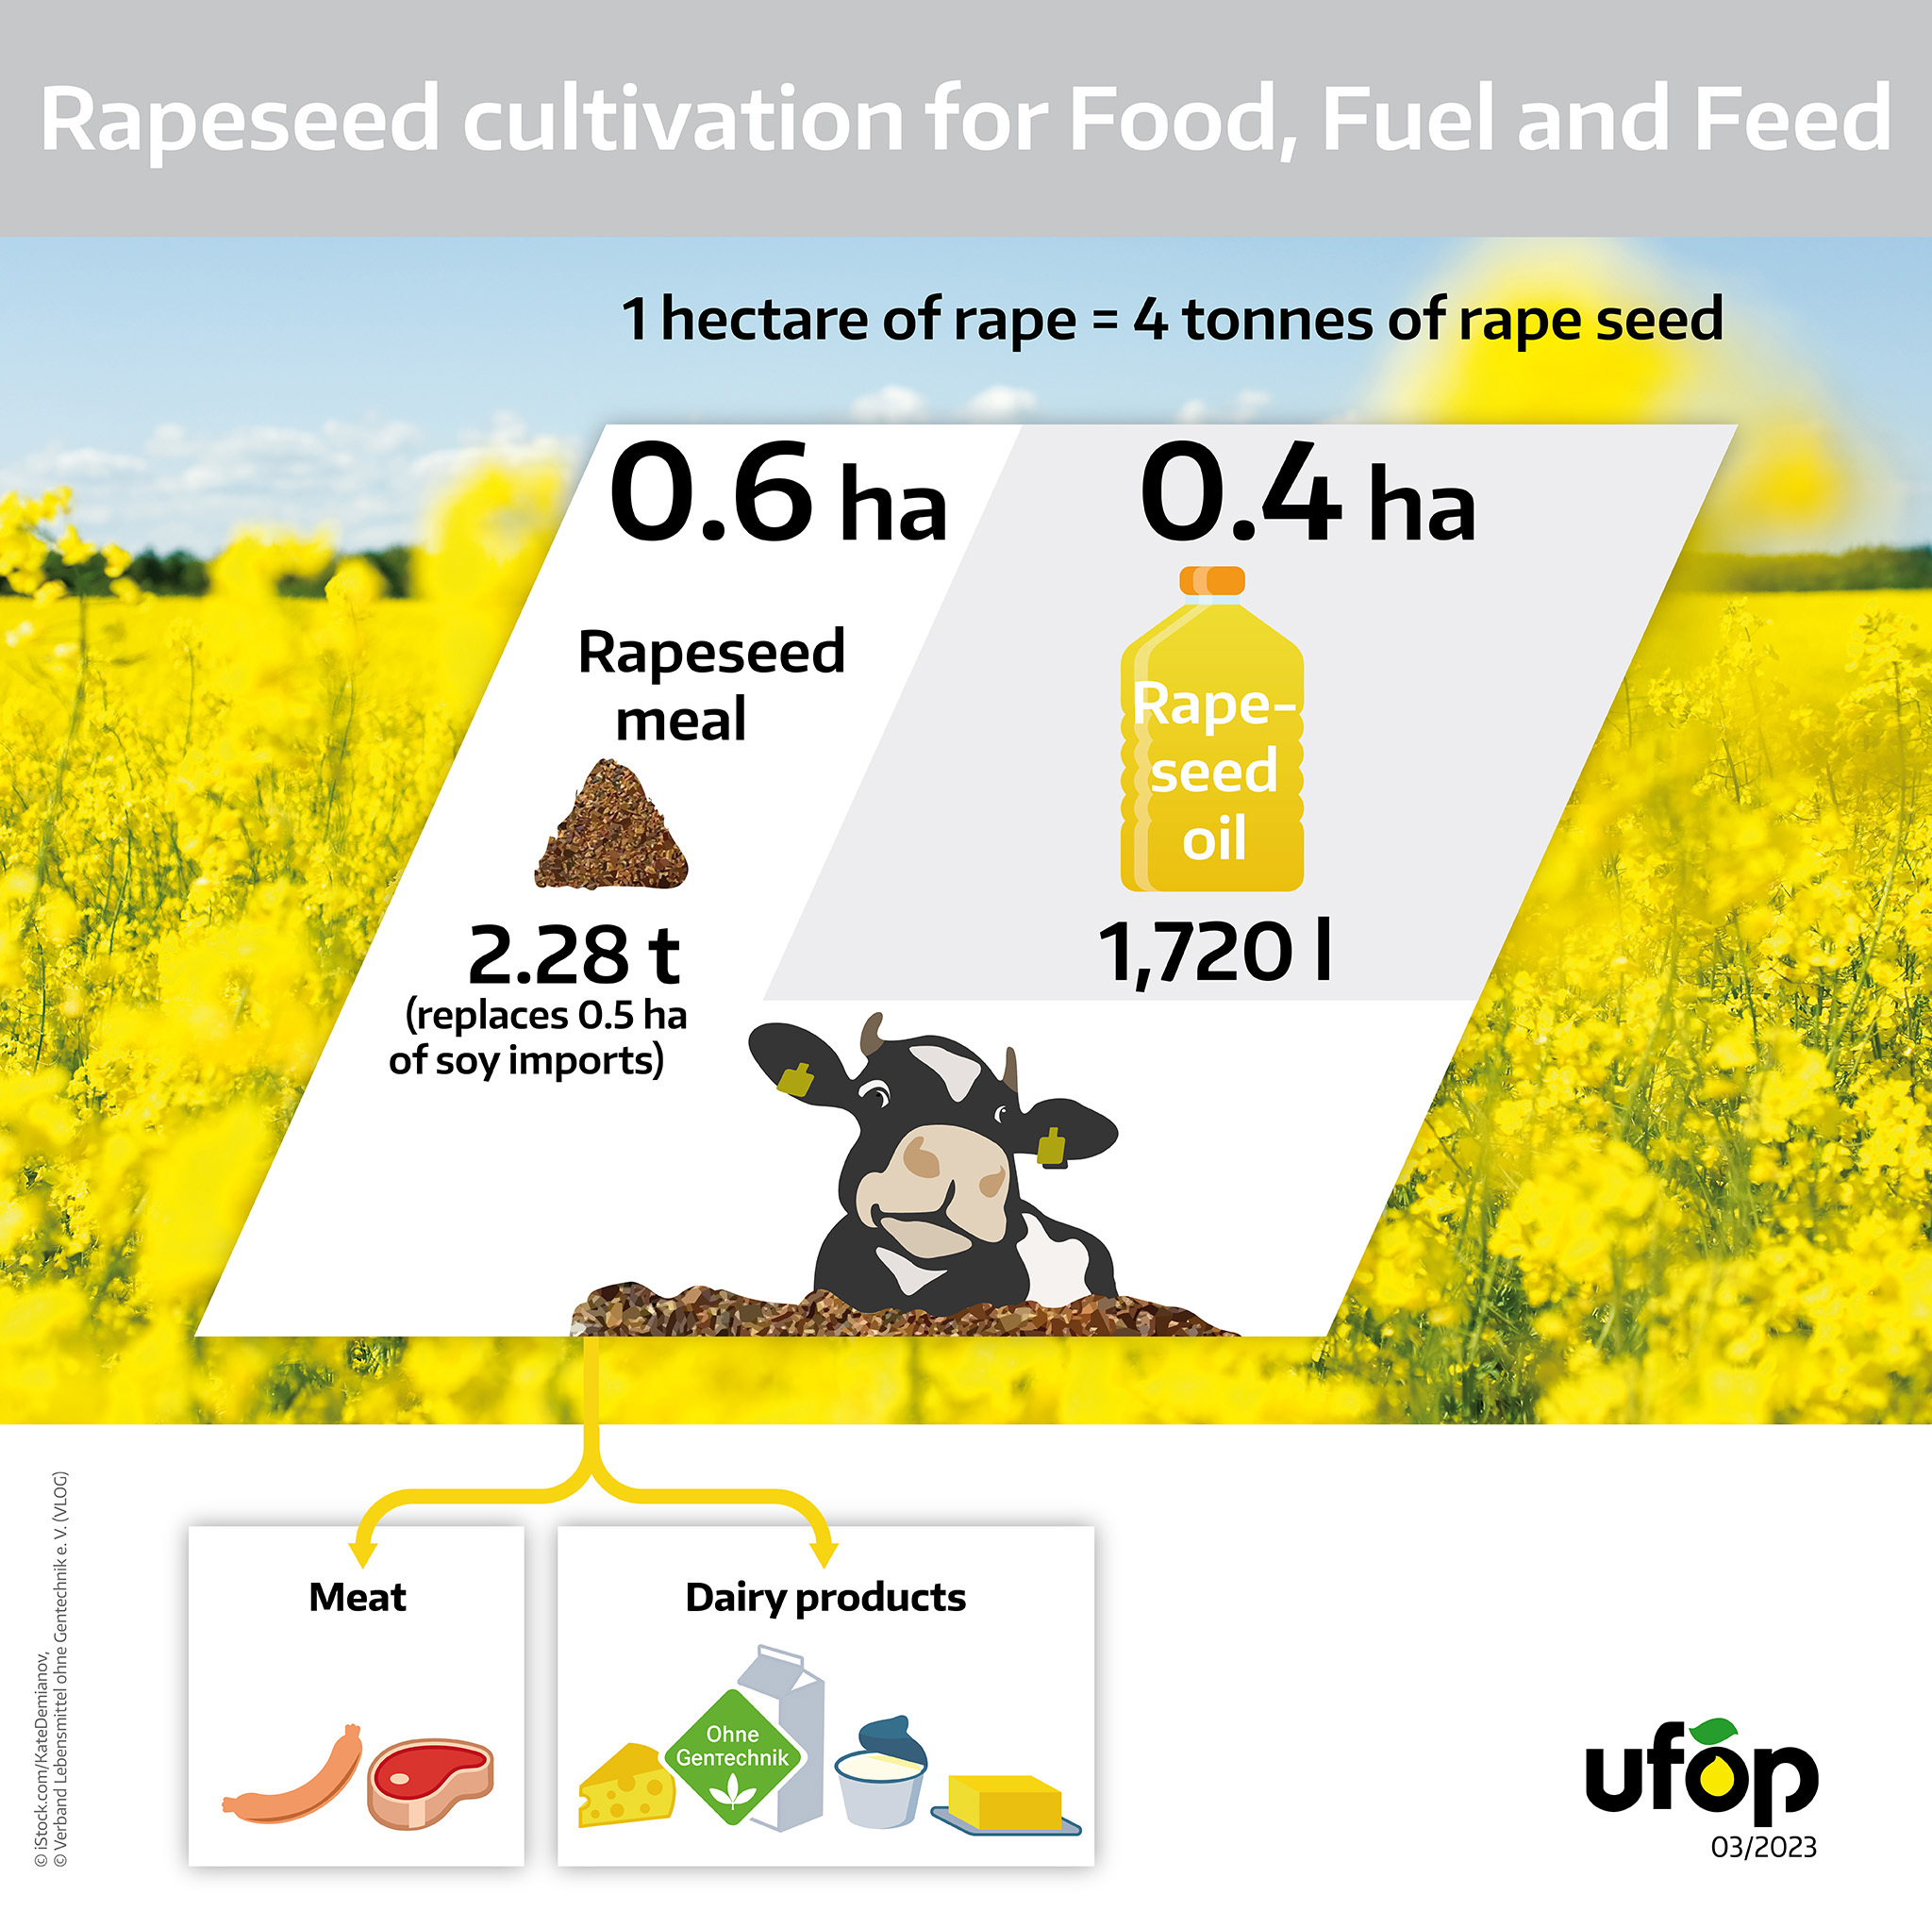 ENG_UFOP_Rapeseed uses per hectare_090323.jpg